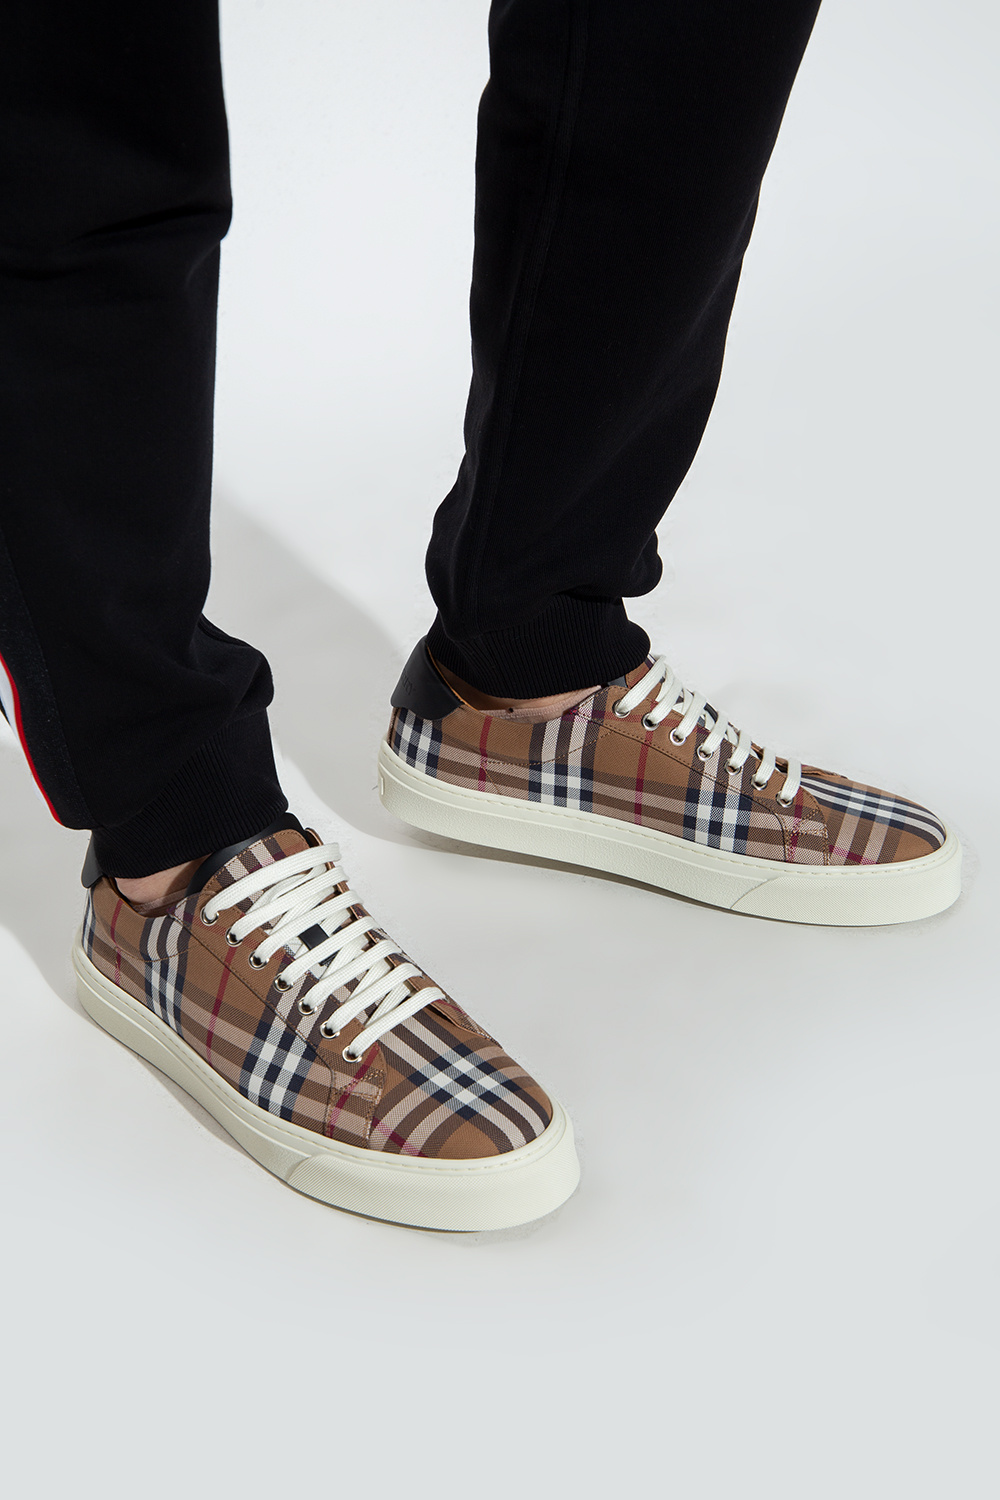 IetpShops GB - nike classic low-top sneaker - Sports shoes with a plaid  pattern Burberry